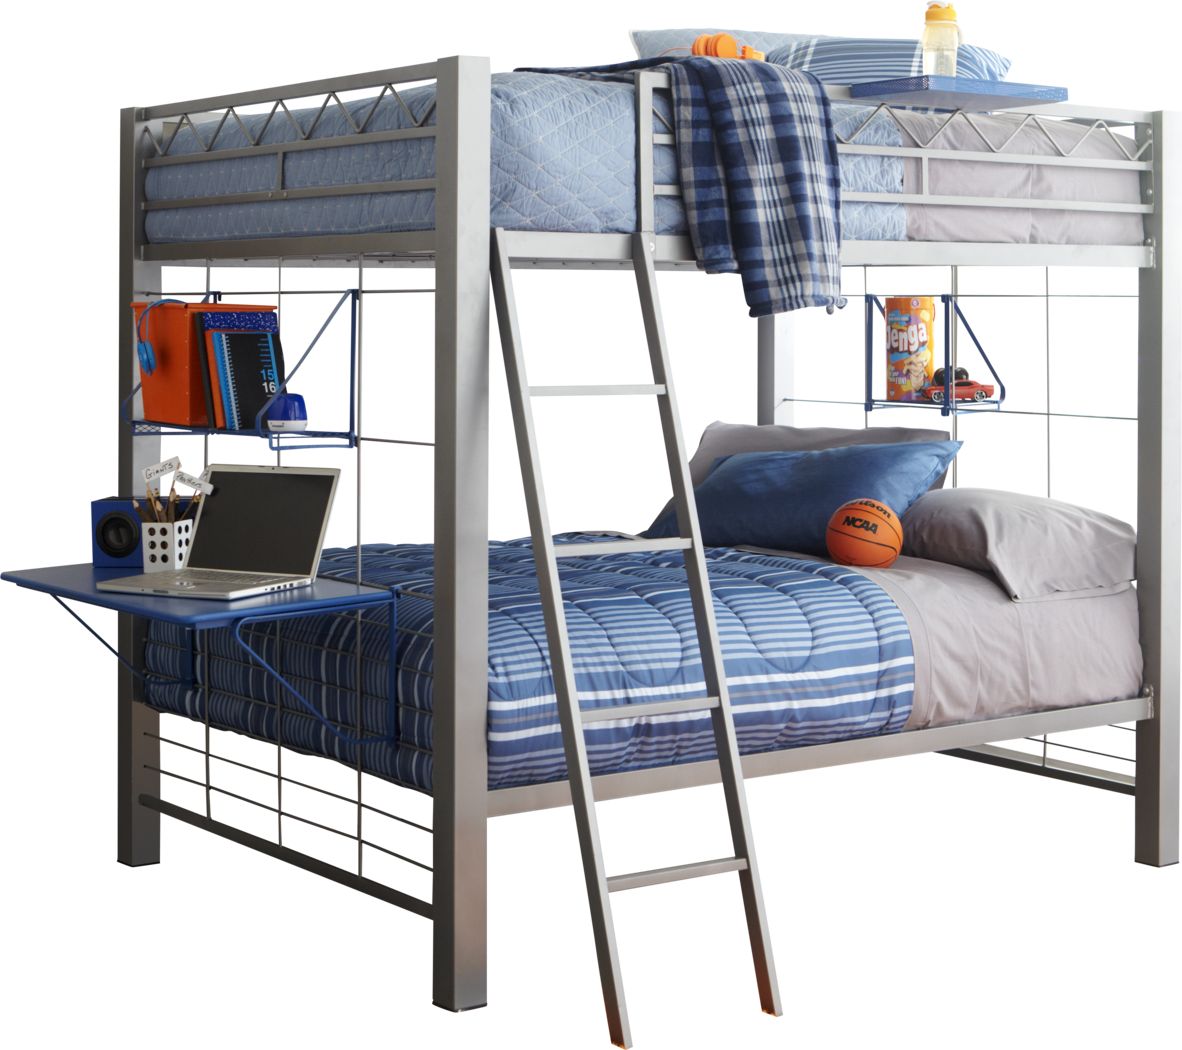 Bunk Beds Rooms To Go Carnawall, Rooms To Go Full Bunk Beds